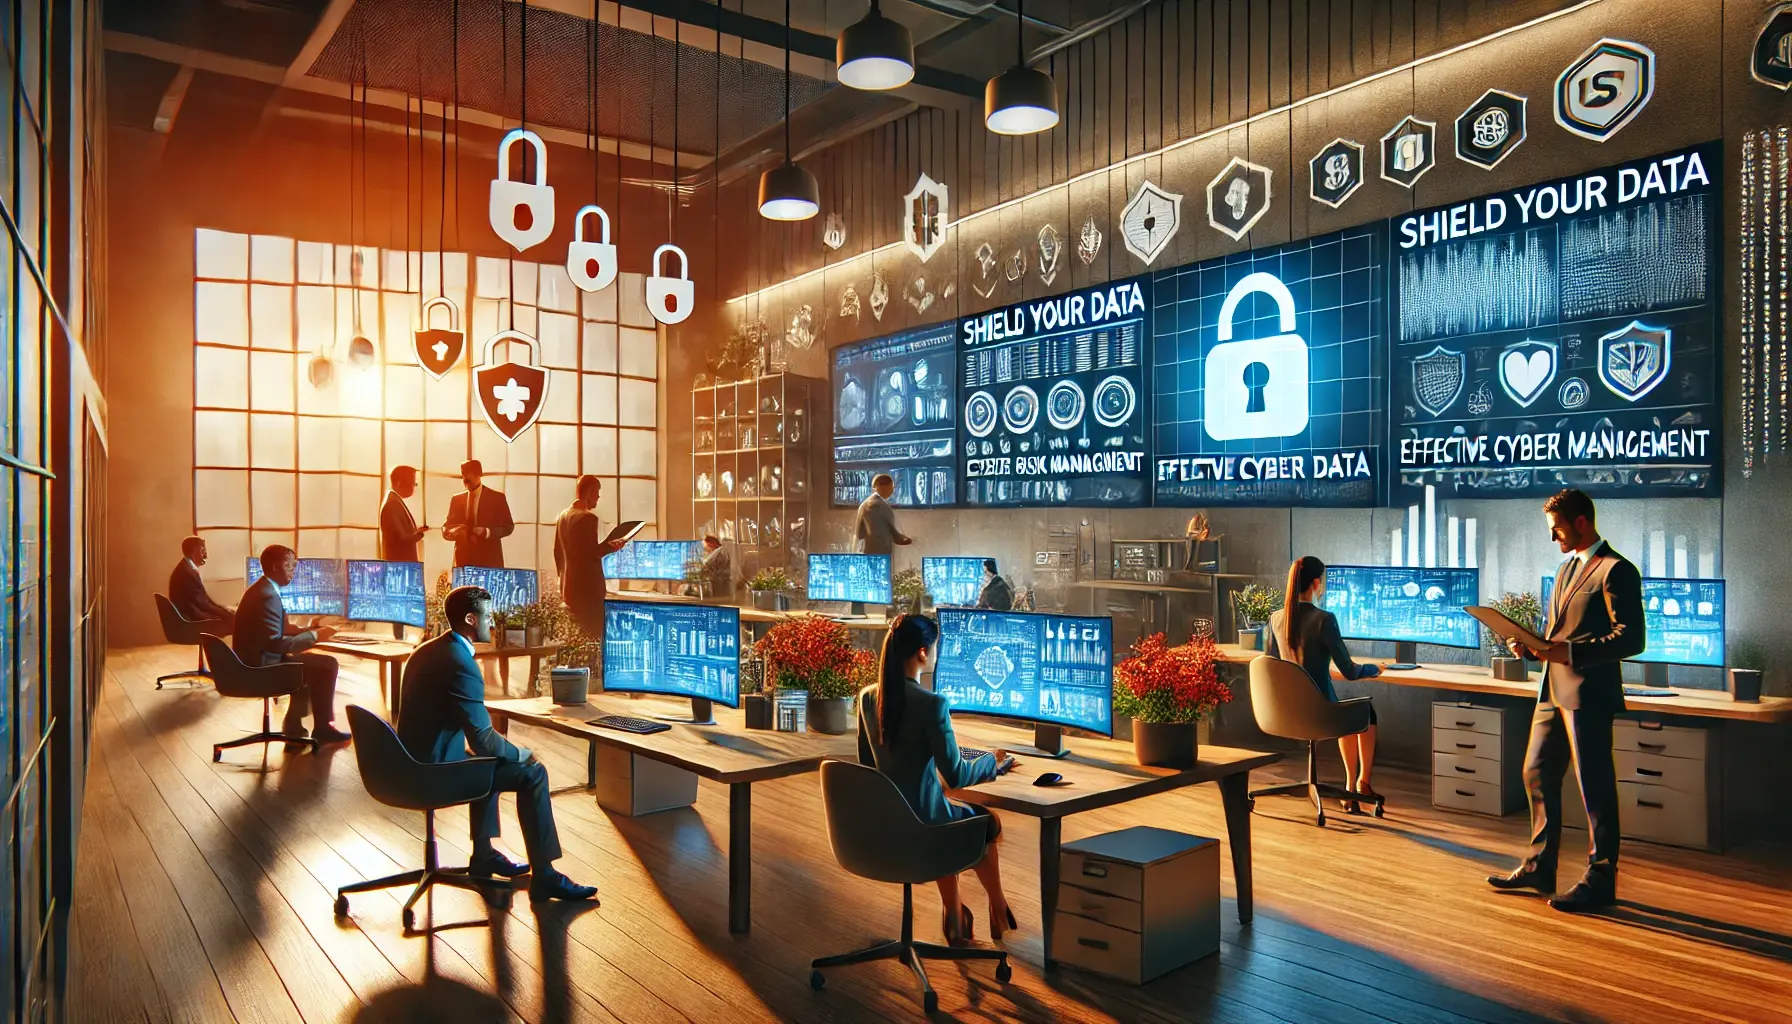 Shield Your Data: Effective Cyber Risk Management